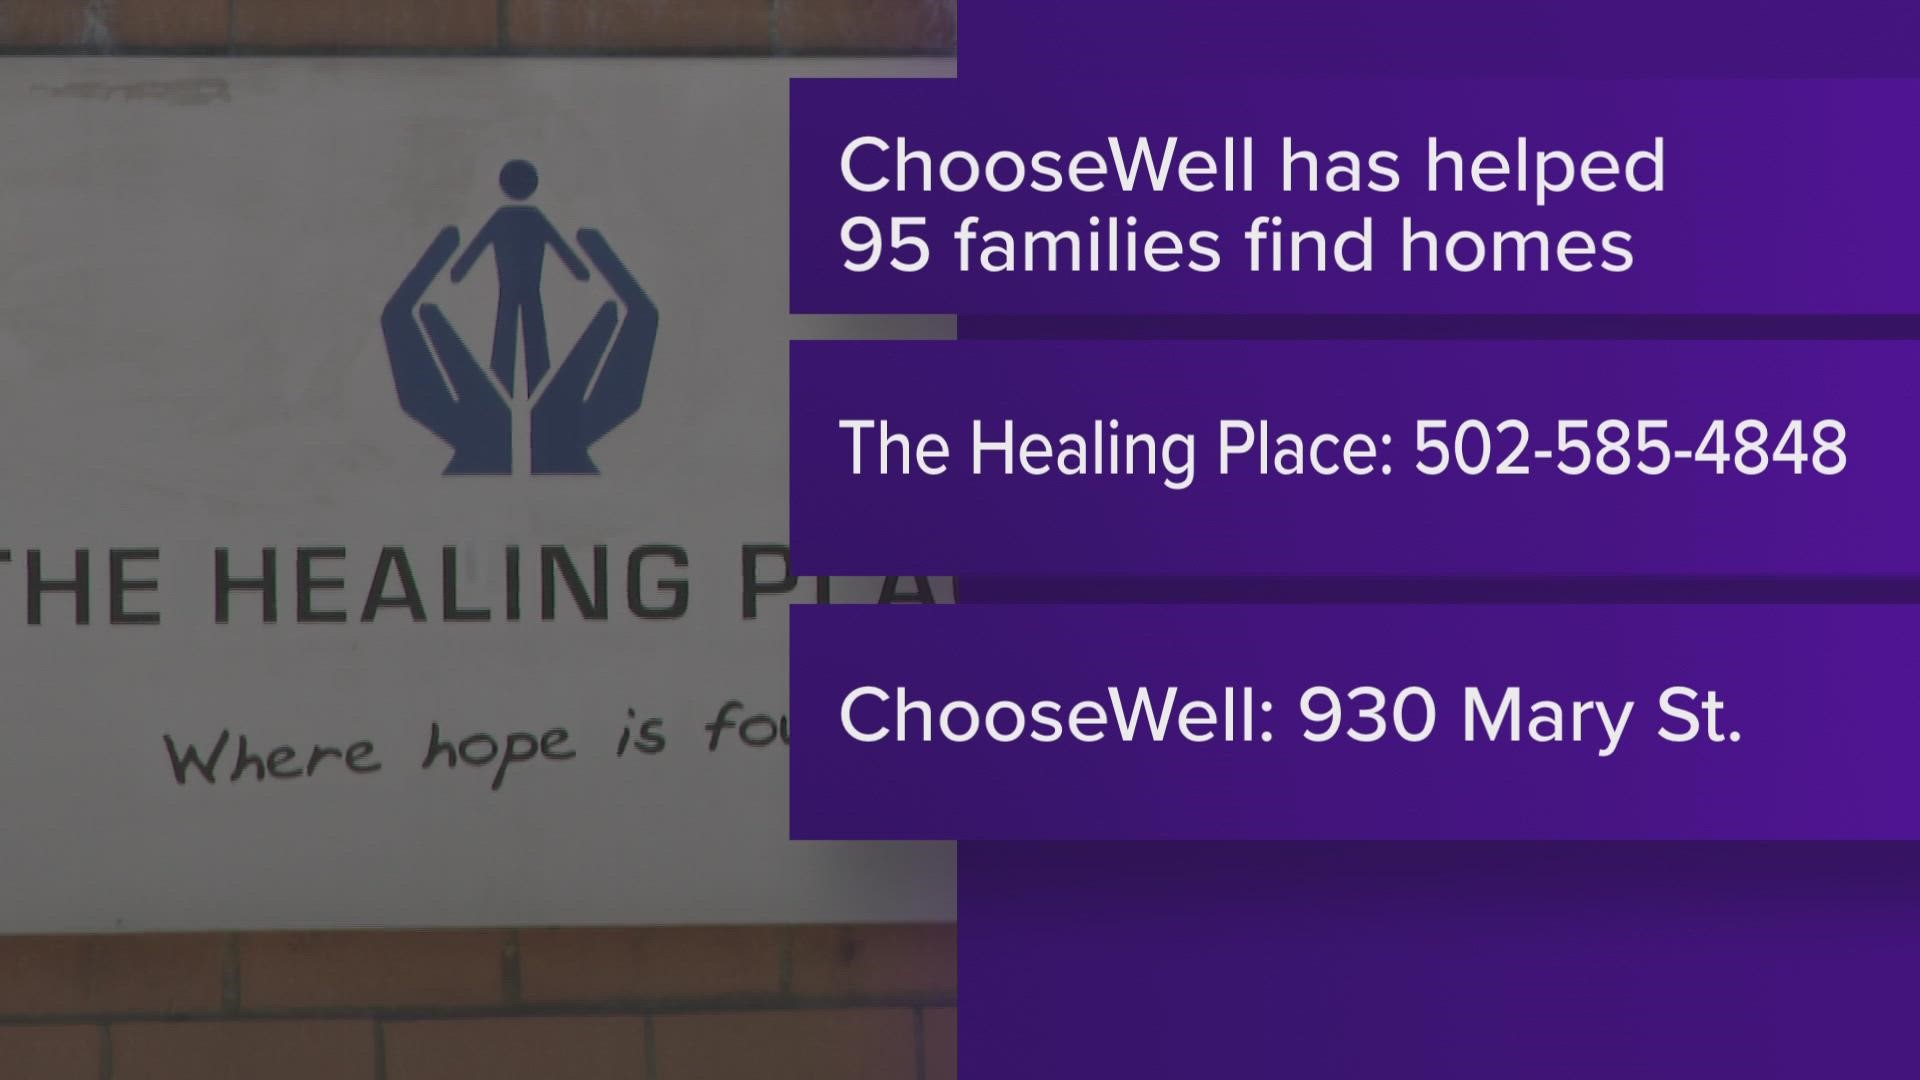 ChooseWell and the Healing Place are now able to expand their recovery program by focusing on housing and educational programs.